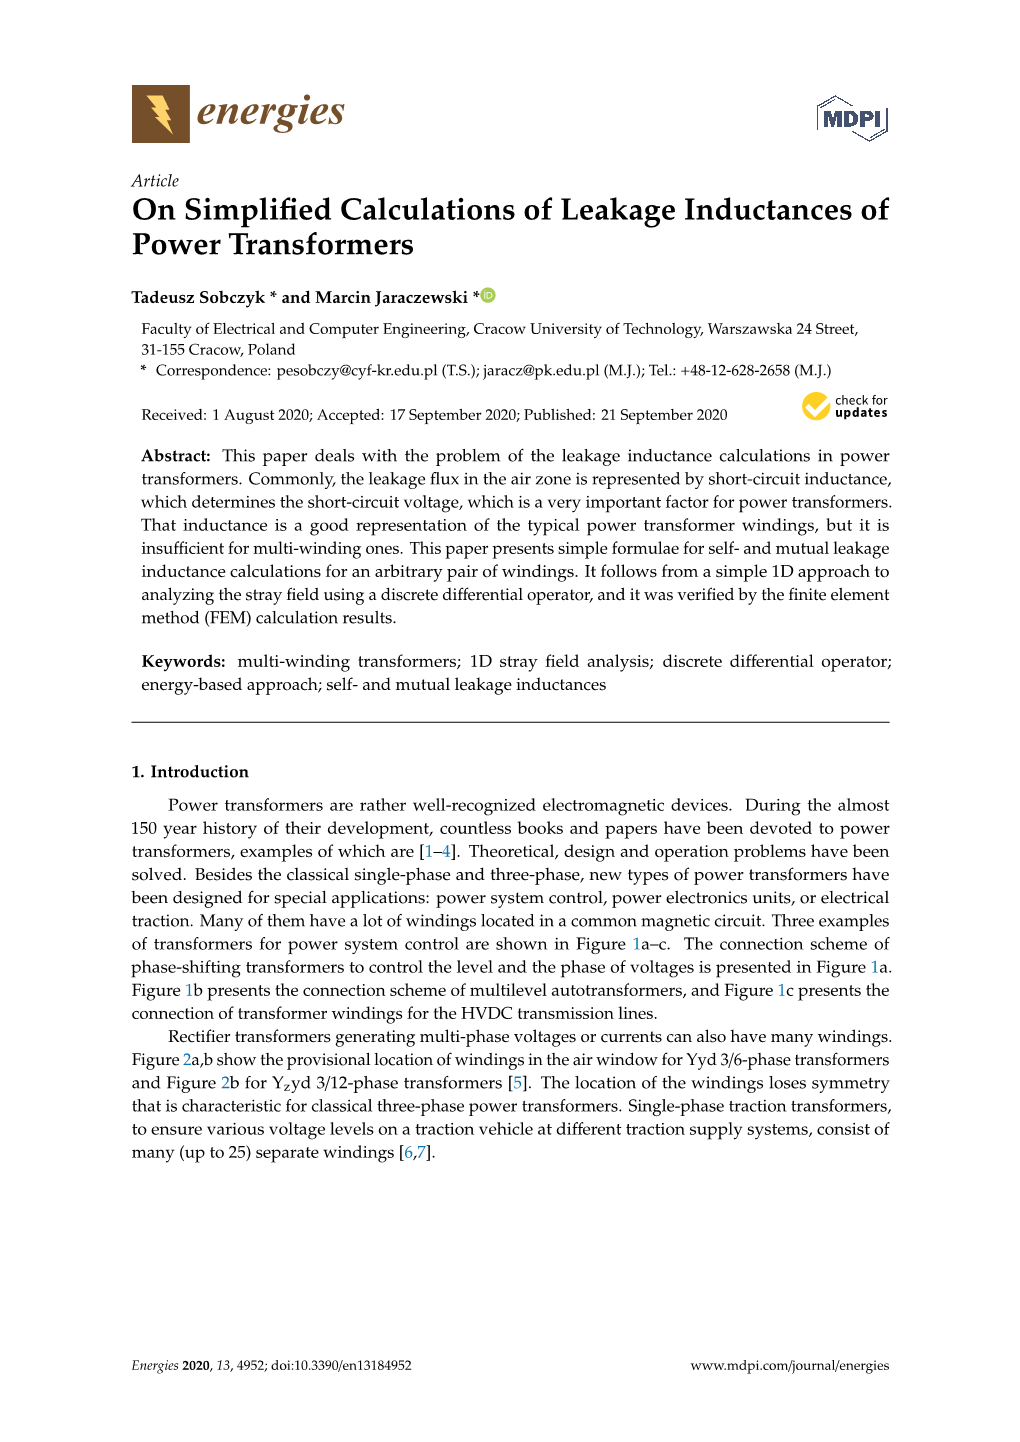 On Simplified Calculations of Leakage Inductances of Power Transformers